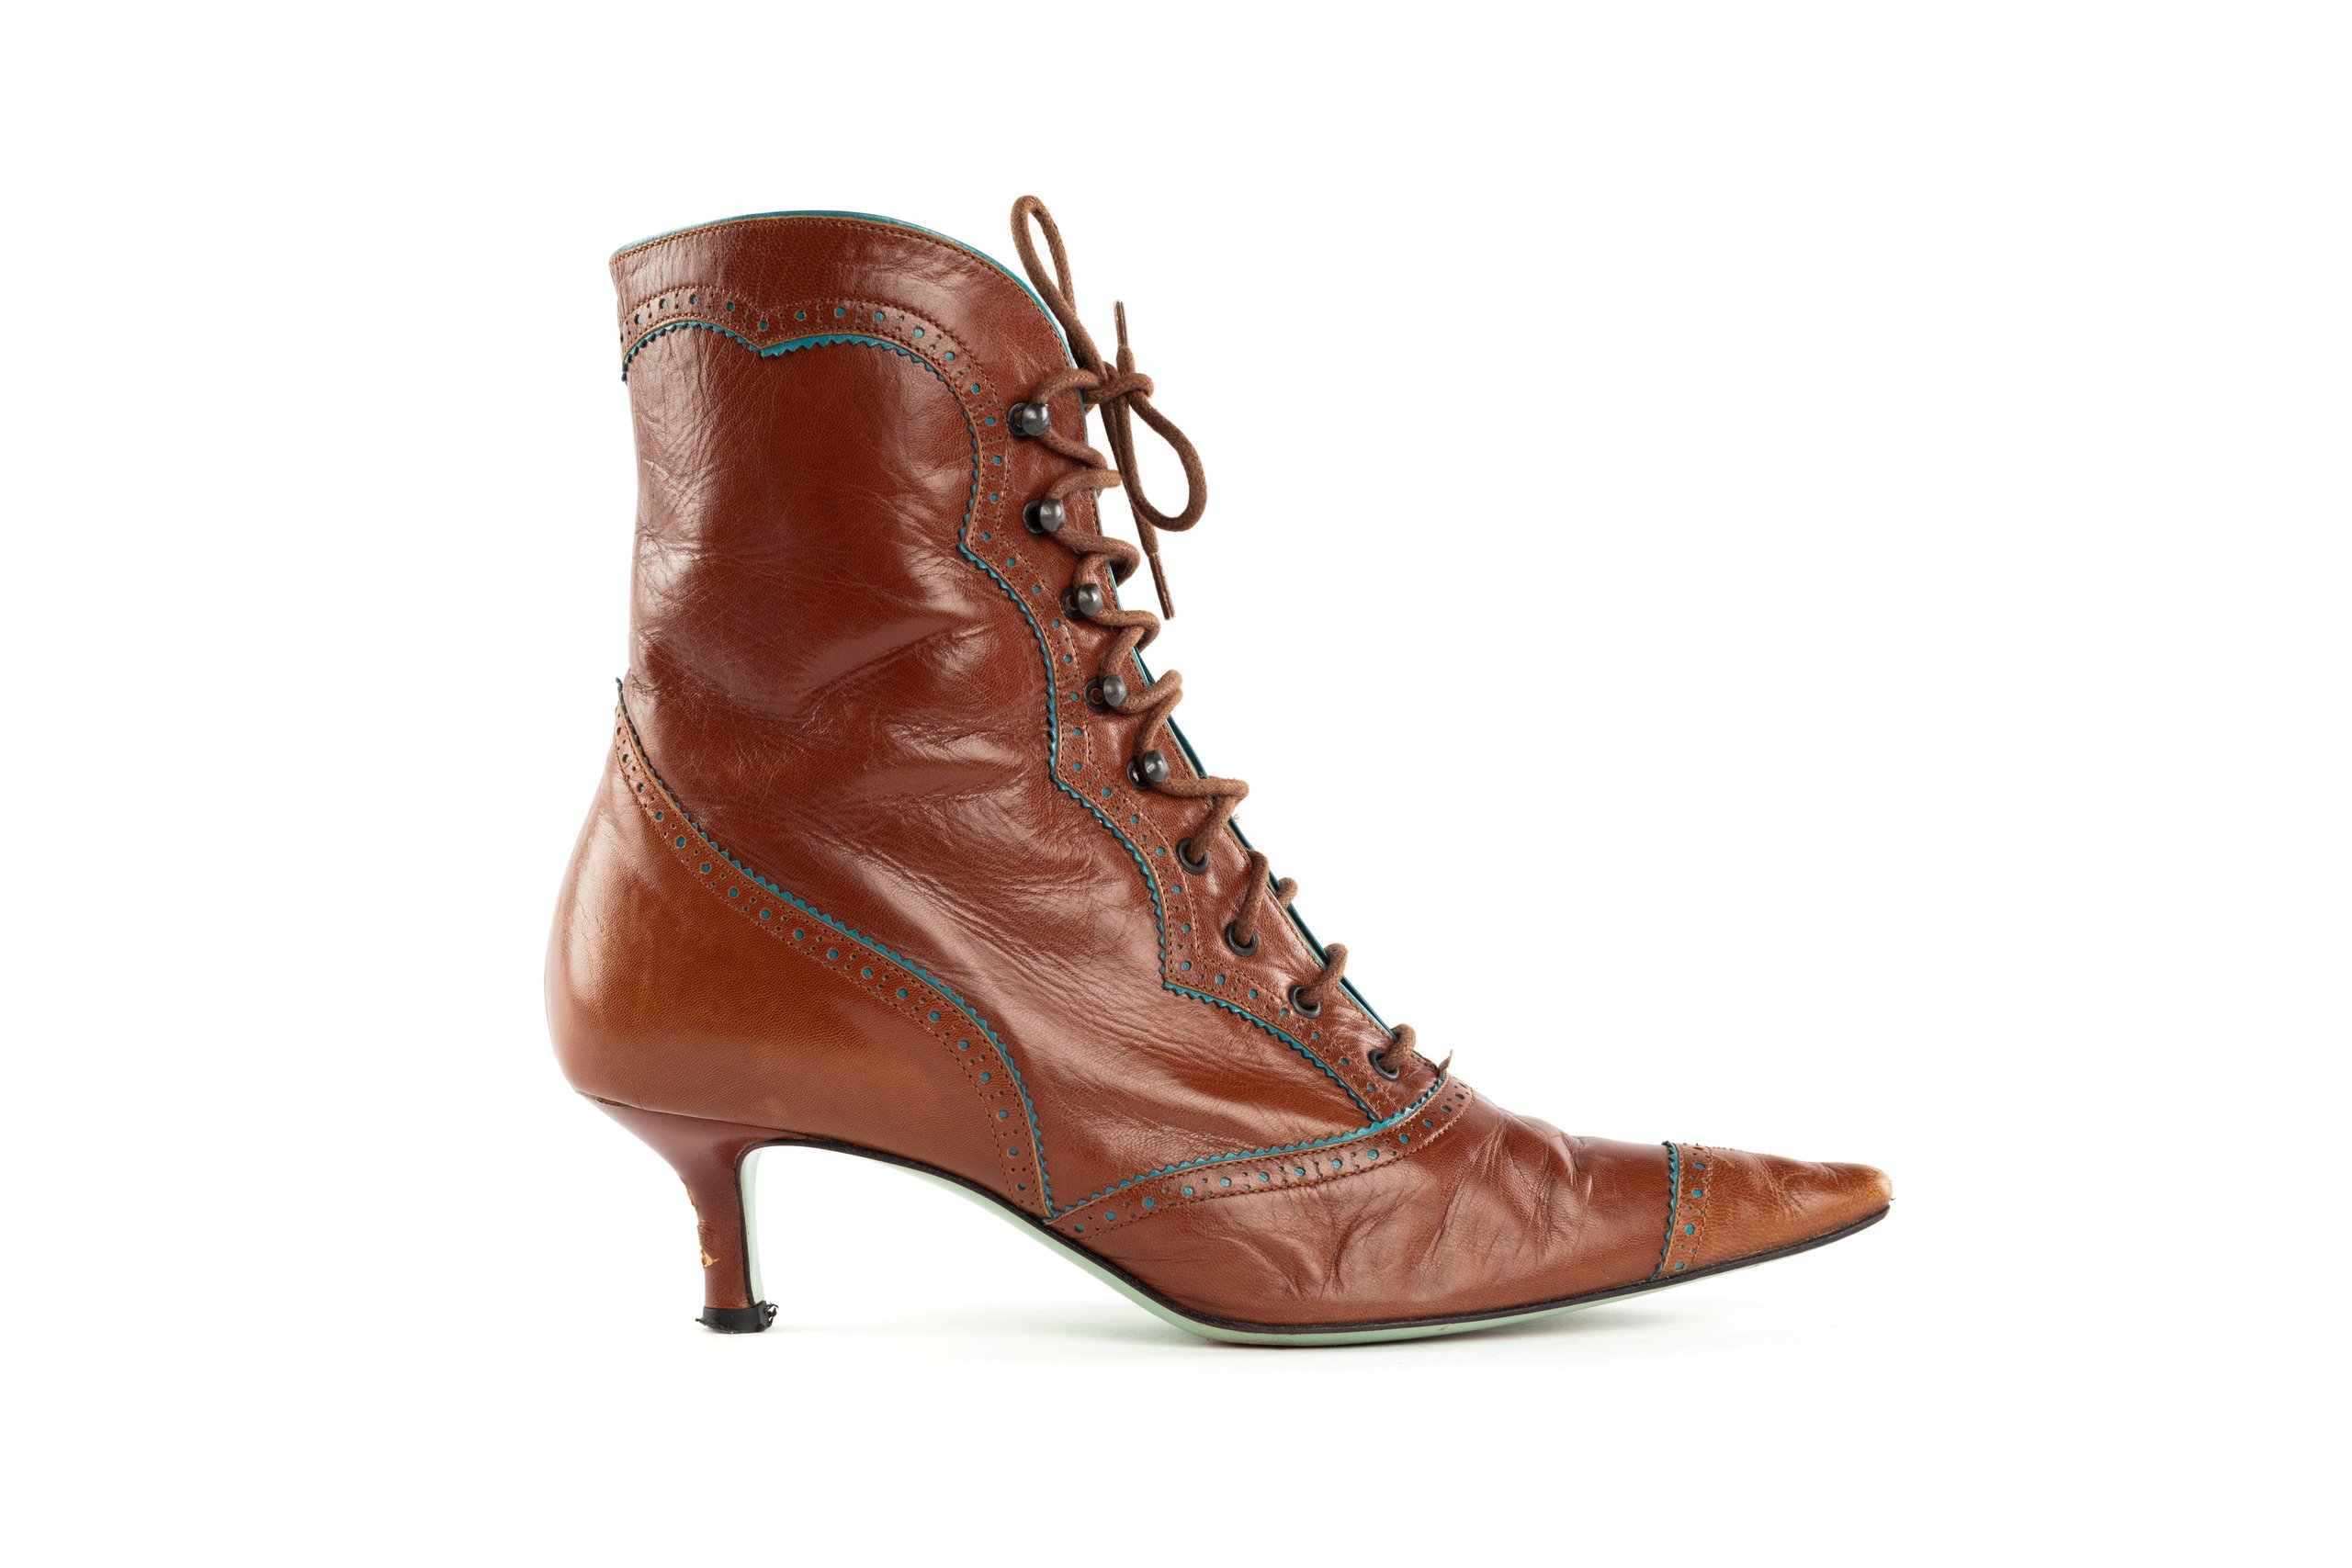 Powerhouse Collection - Pair of womens boots designed by Paul Smith for  Emma Hope